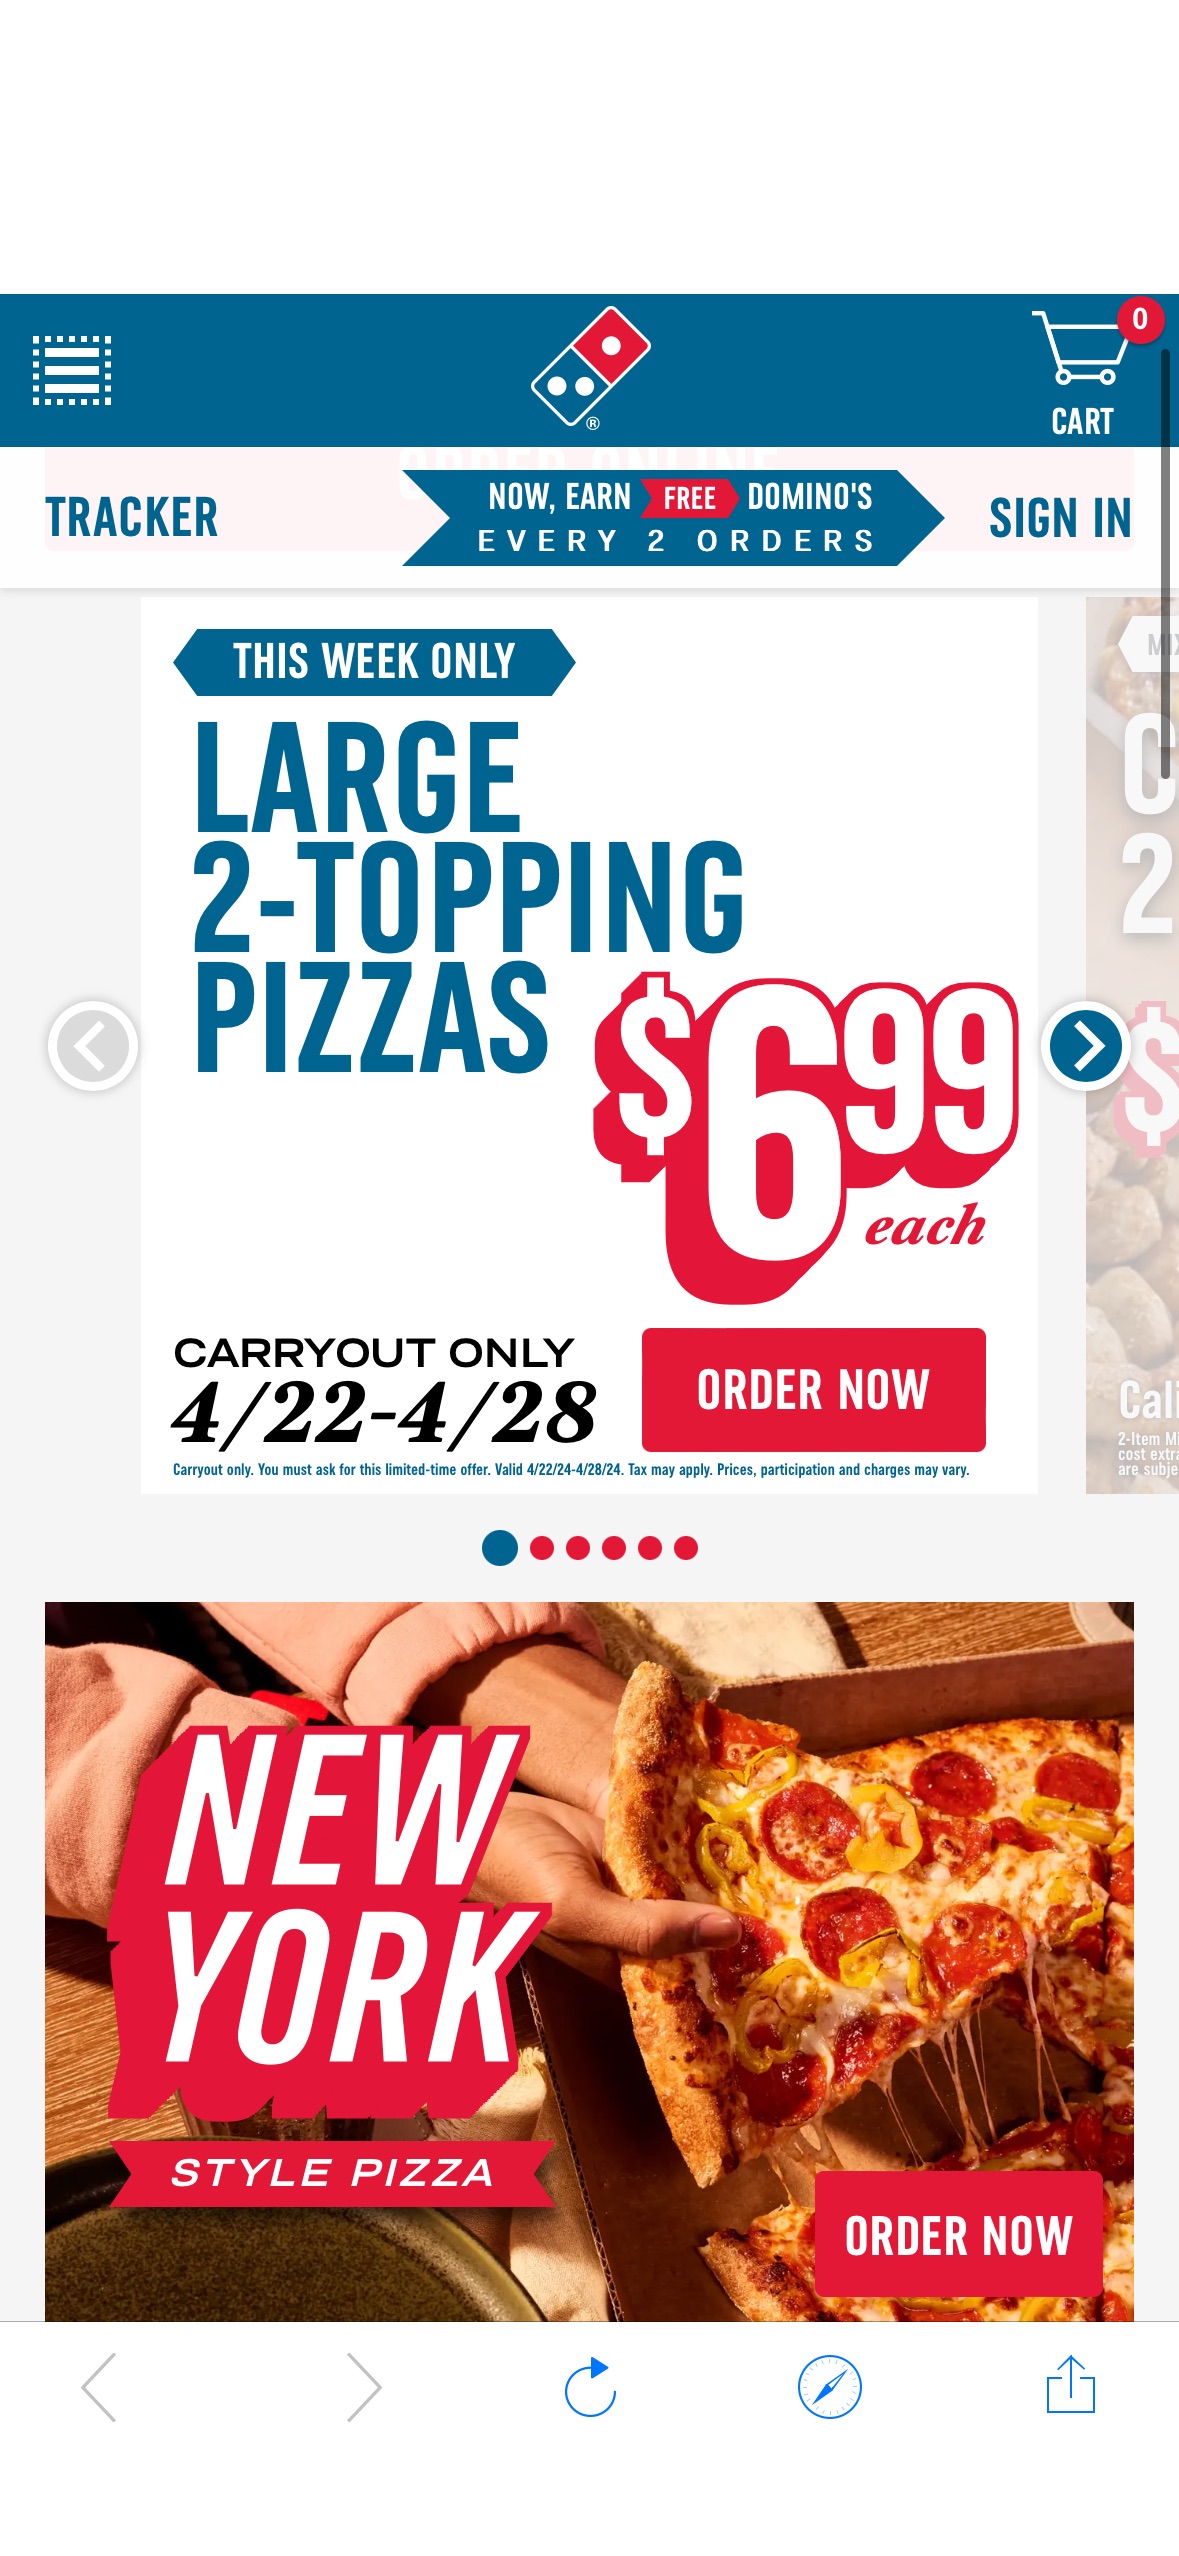 From April 22 - 28, get all large two-topping pizzas for just $6.99 when you order carry-out at Domino's